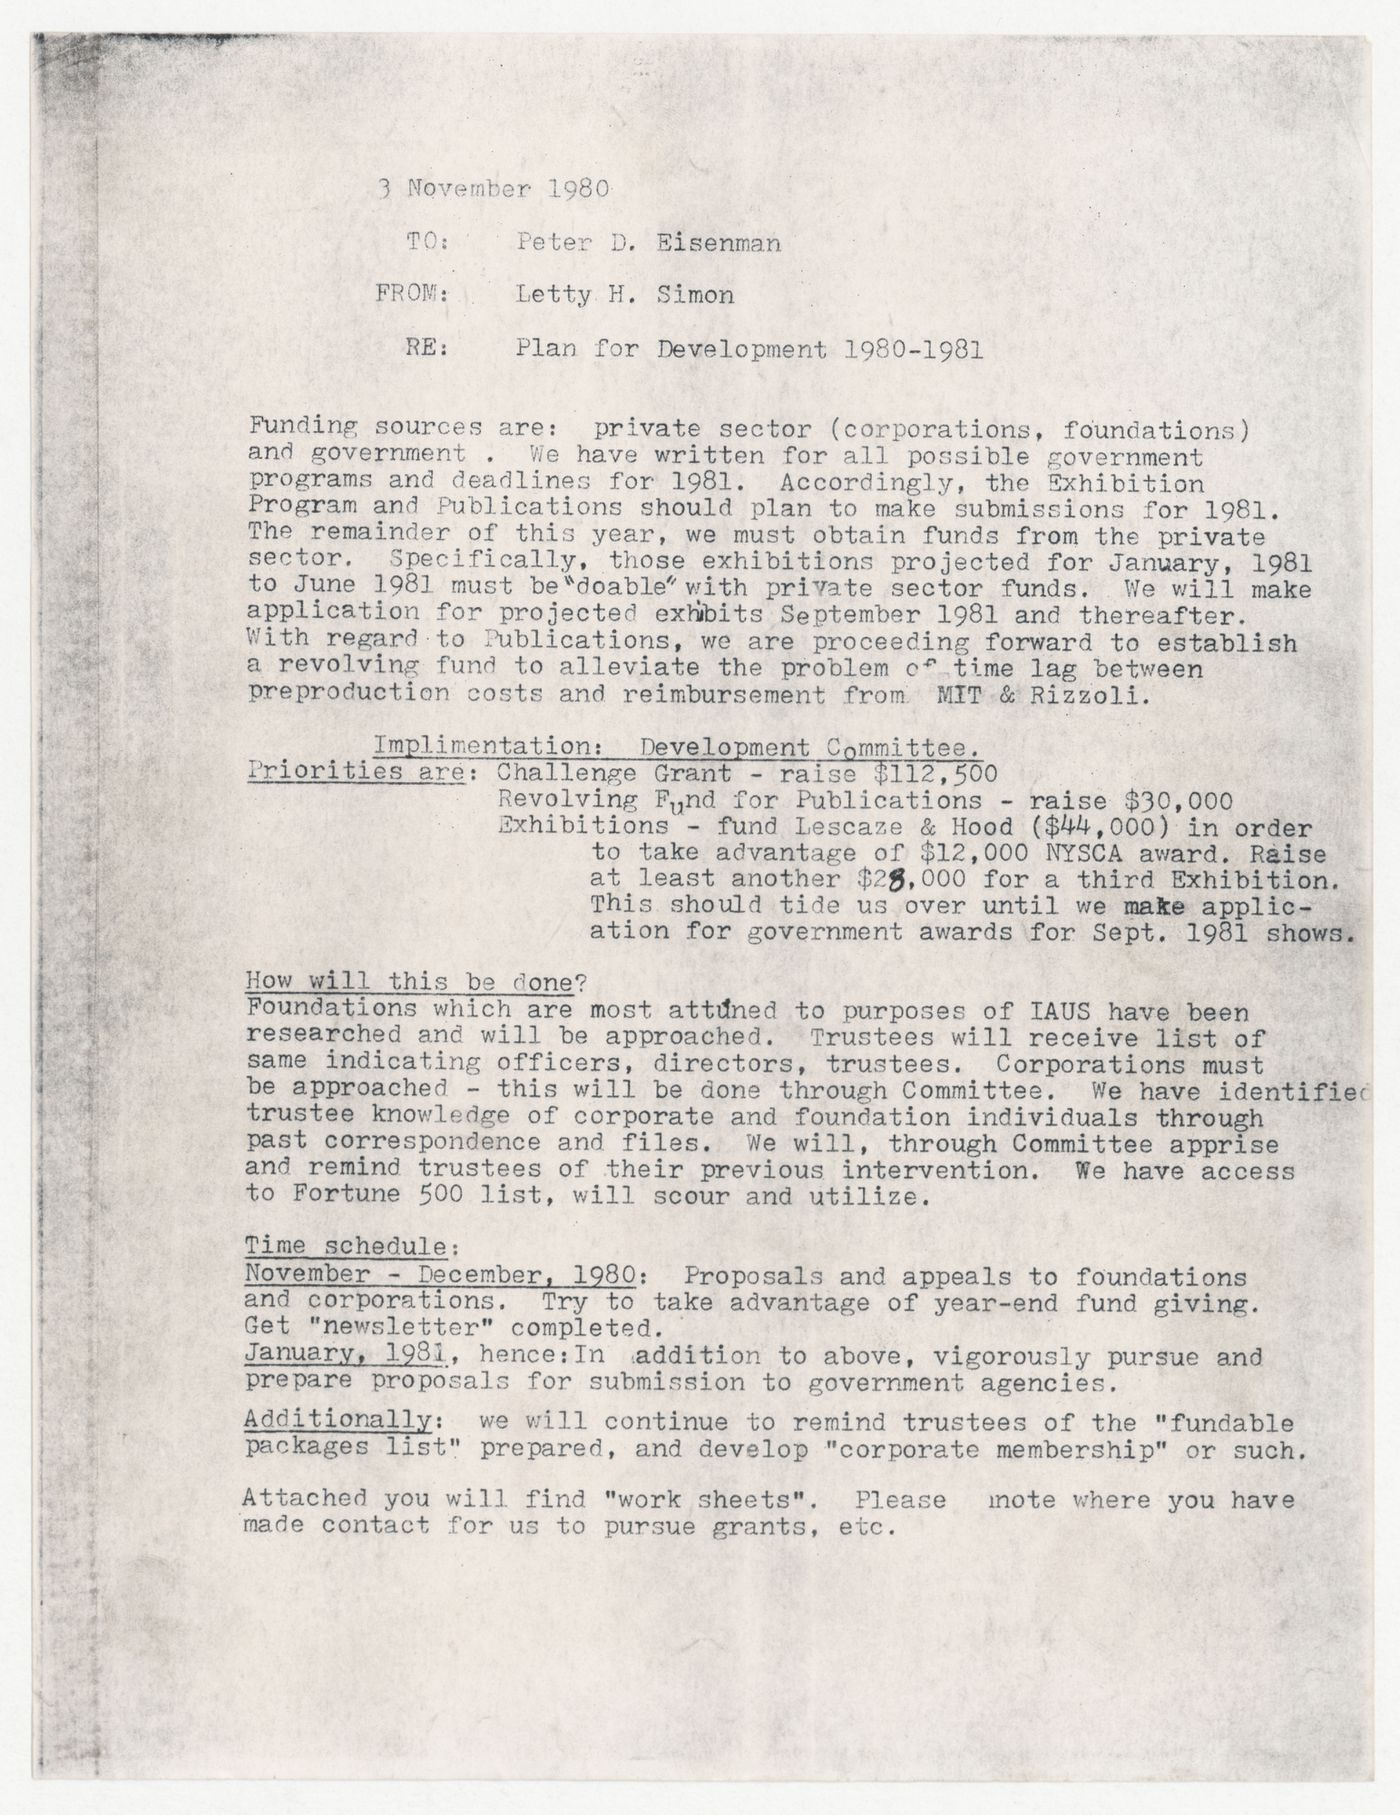 Memorandum from Letty H. Simon to Peter D. Eisenman about plan for development 1980-1981 with annotations by Peter D. Eisenman